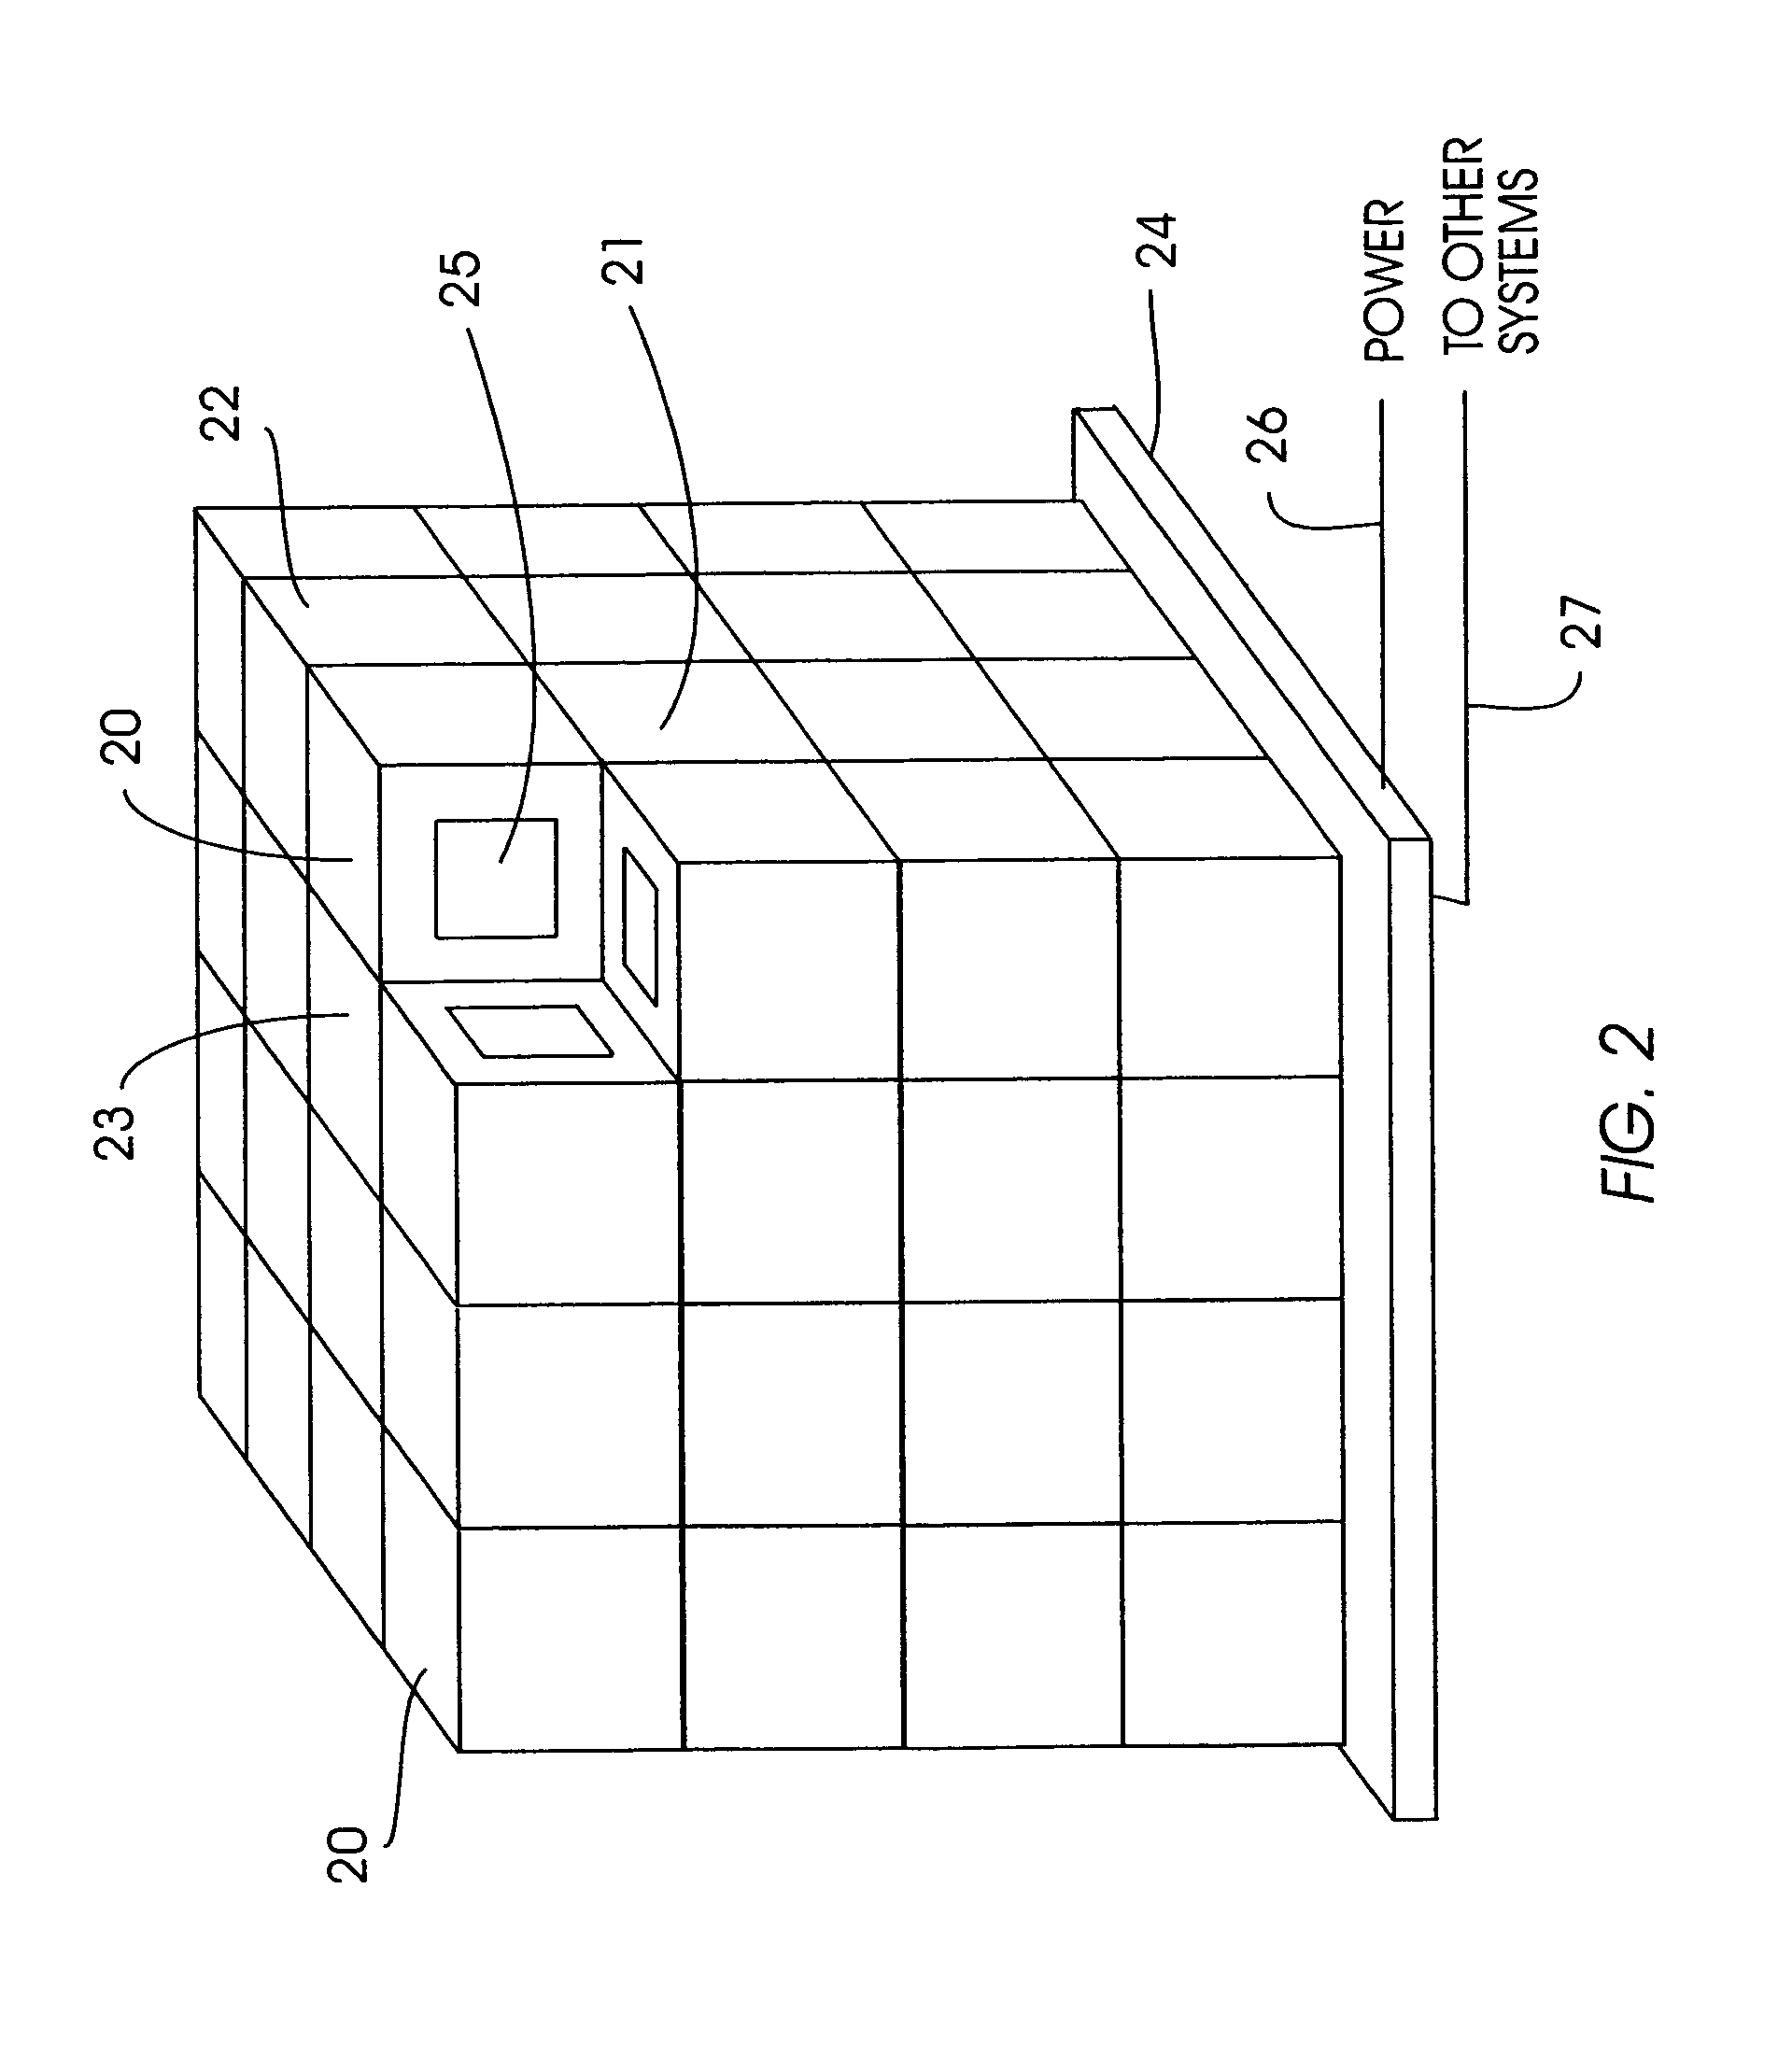 Scalable computer system having surface-mounted capacitive couplers for intercommunication